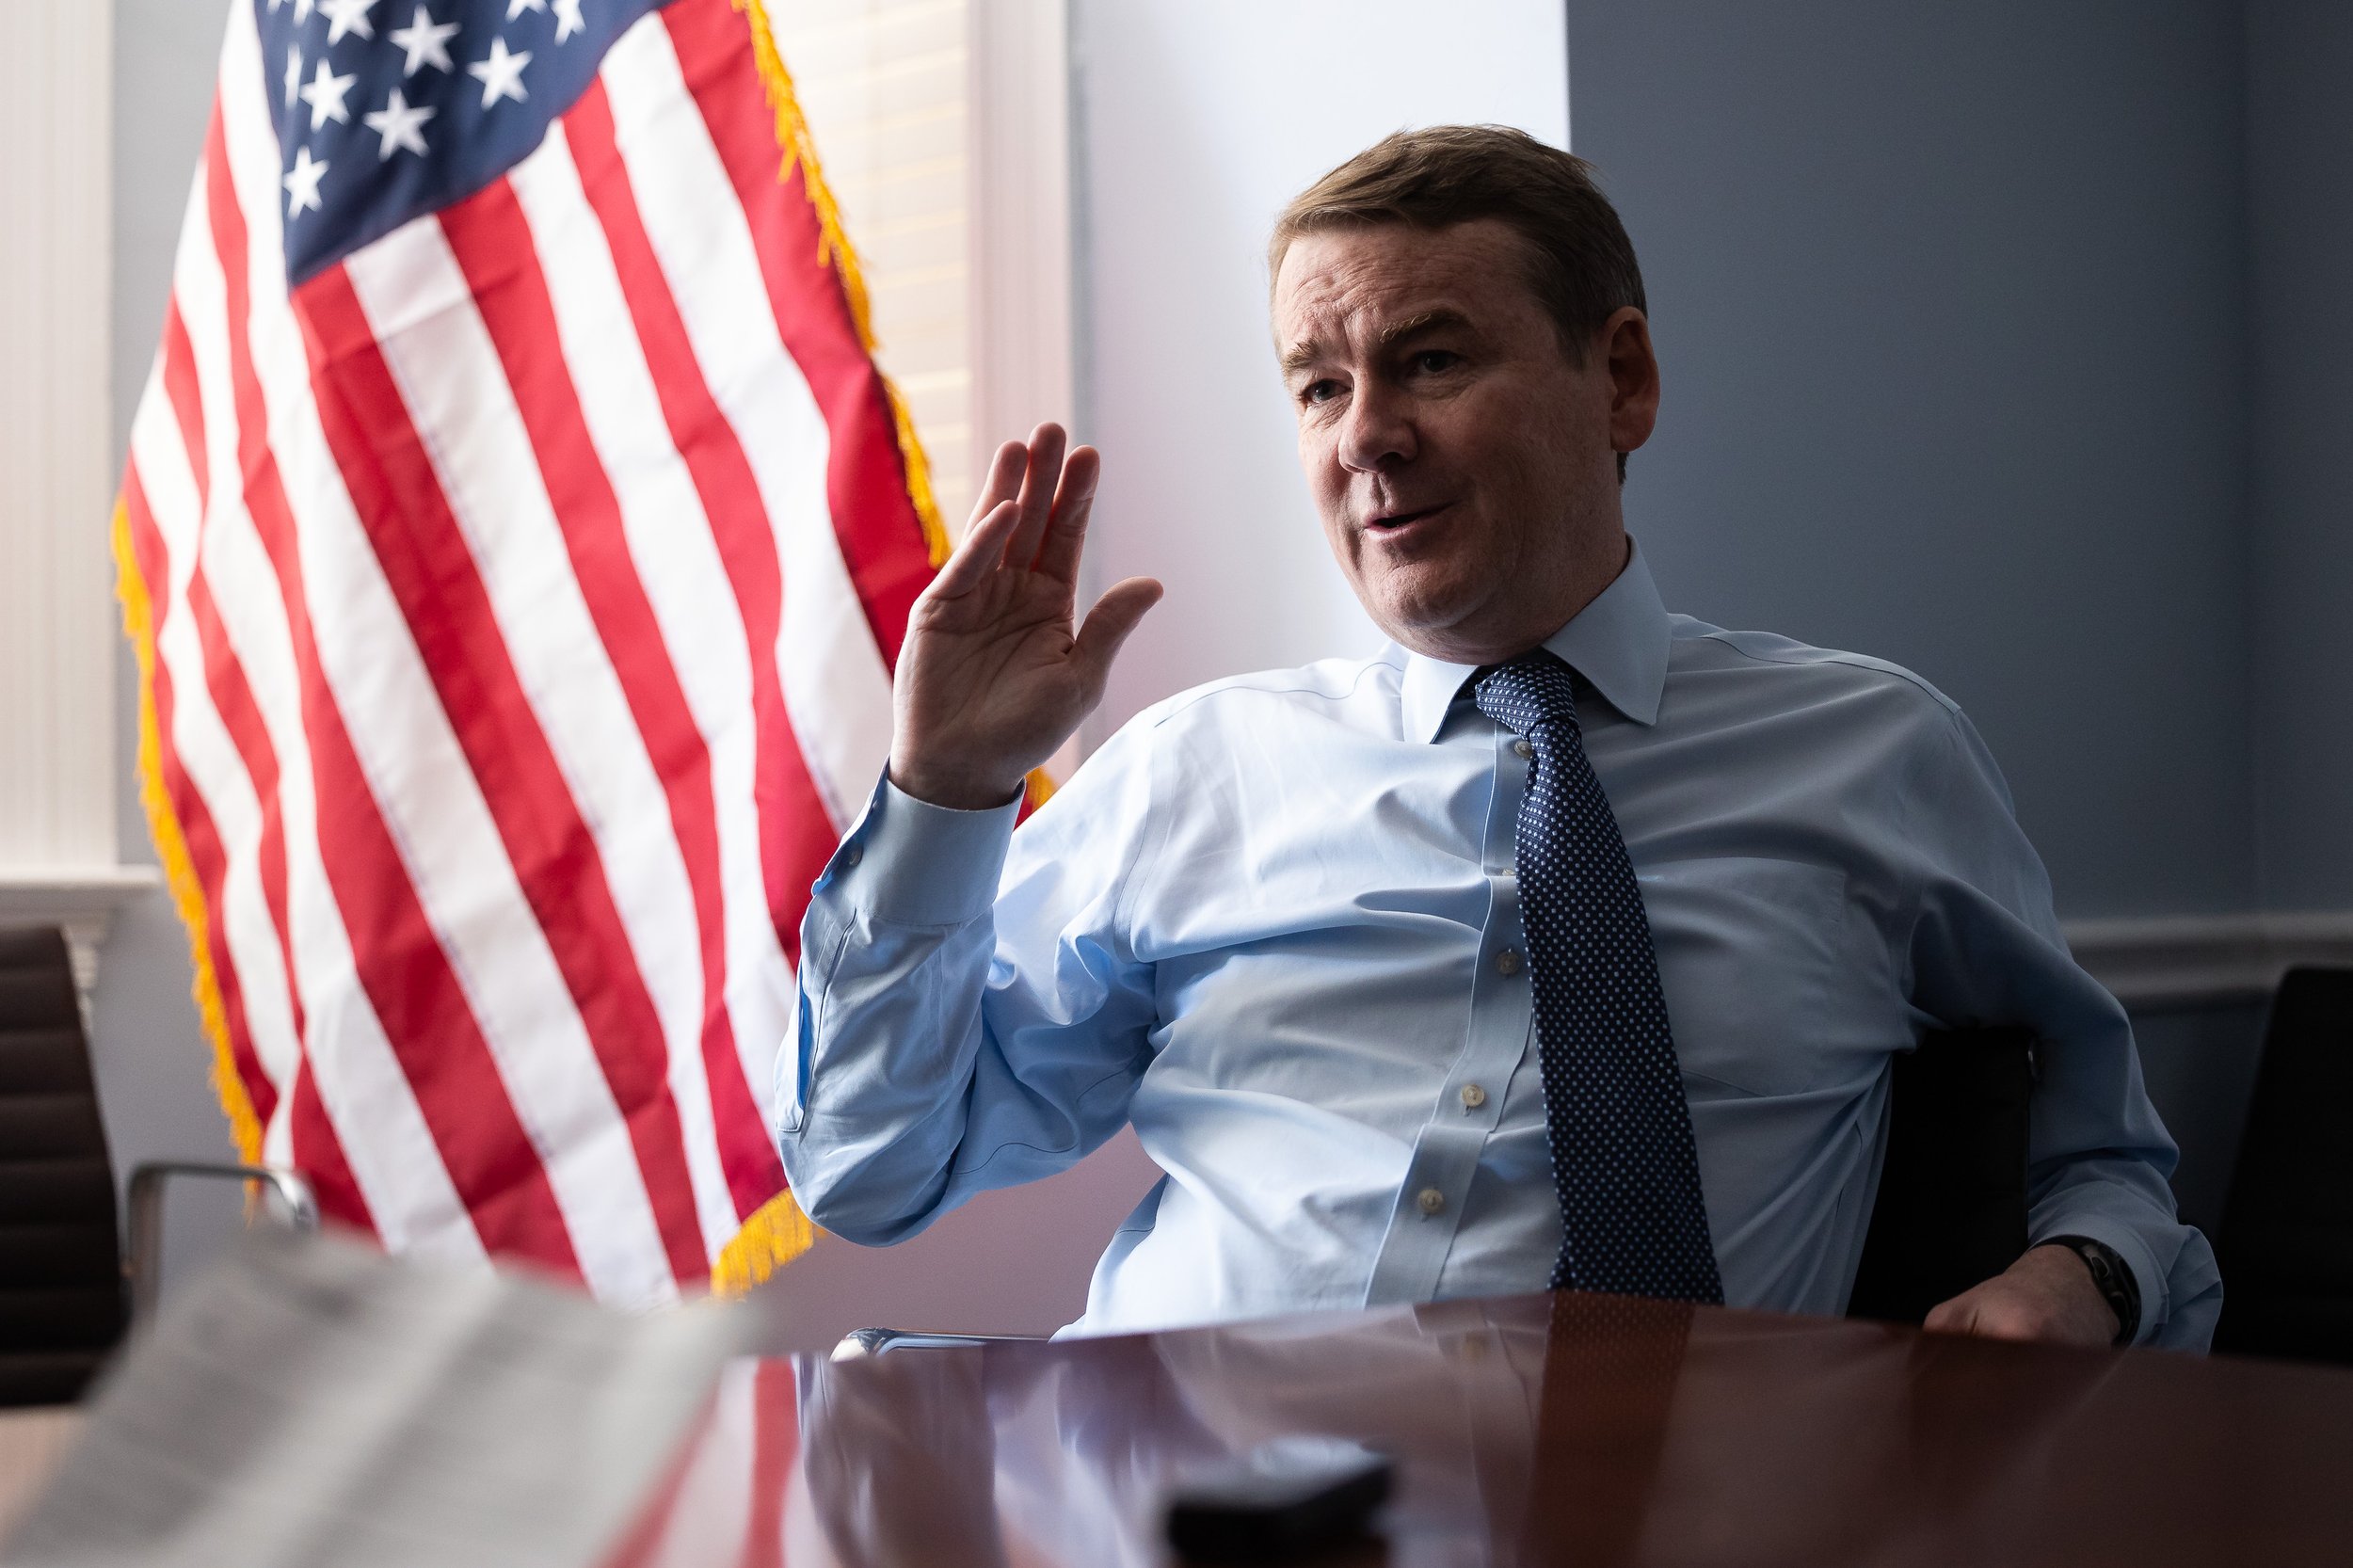  Sen. Michael Bennet (D-Colo.) gives an interview at Democratic Senatorial Campaign Committee headquarters on Capitol Hill May 19, 2022.  